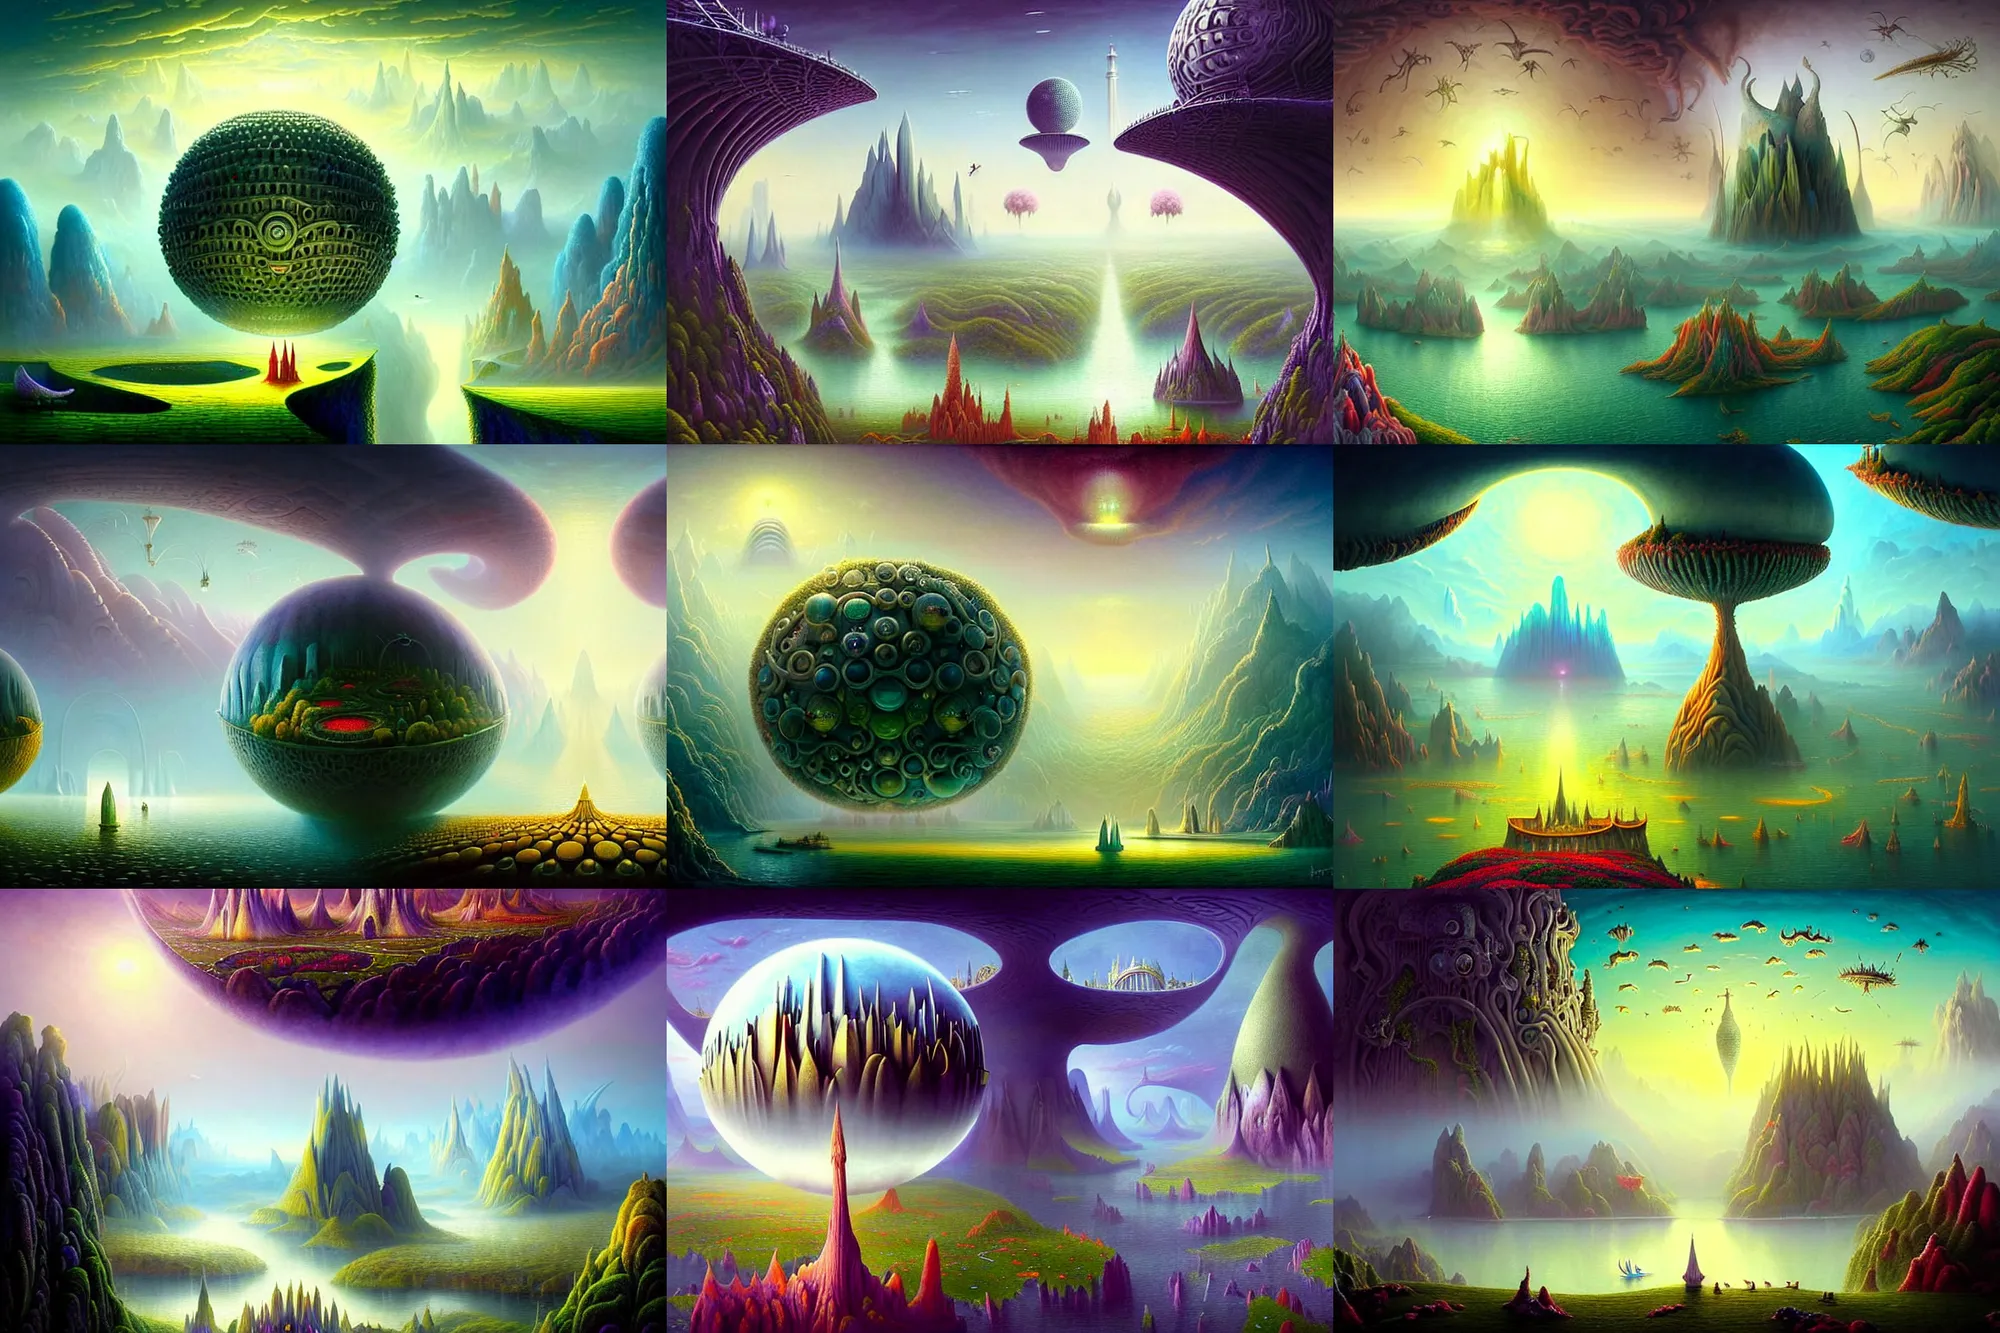 Prompt: a beautiful epic stunning amazing and insanely detailed matte painting of alien dream worlds with surreal architecture designed by Heironymous Bosch, mega structures inspired by Heironymous Bosch's Garden of Earthly Delights, vast surreal landscape and horizon by Asher Durand and Cyril Rolando and Thomas Kinkade, rich pastel color palette, masterpiece!!, grand!, imaginative!!!, whimsical!!, epic scale, intricate details, sense of awe, elite, fantasy realism, complex composition, 4k post processing